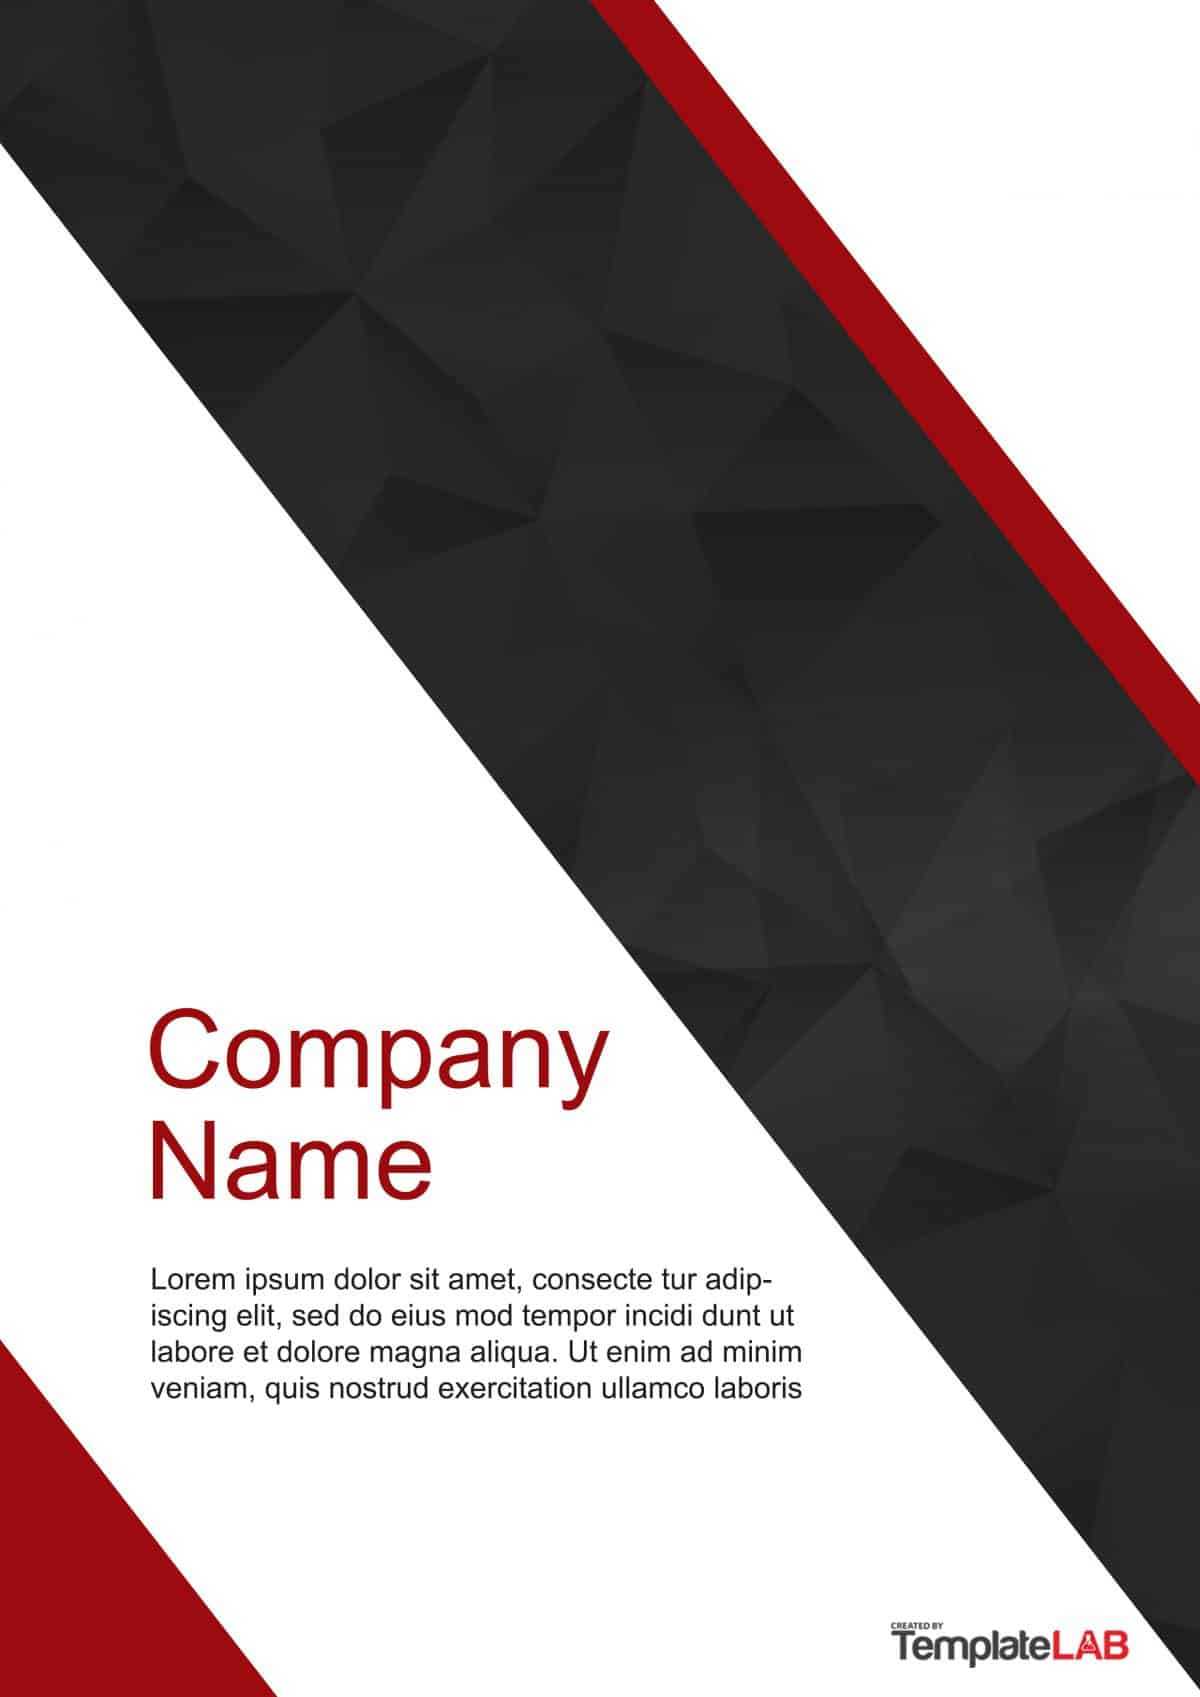 39 Amazing Cover Page Templates (Word + Psd) ᐅ Templatelab For Word Report Cover Page Template